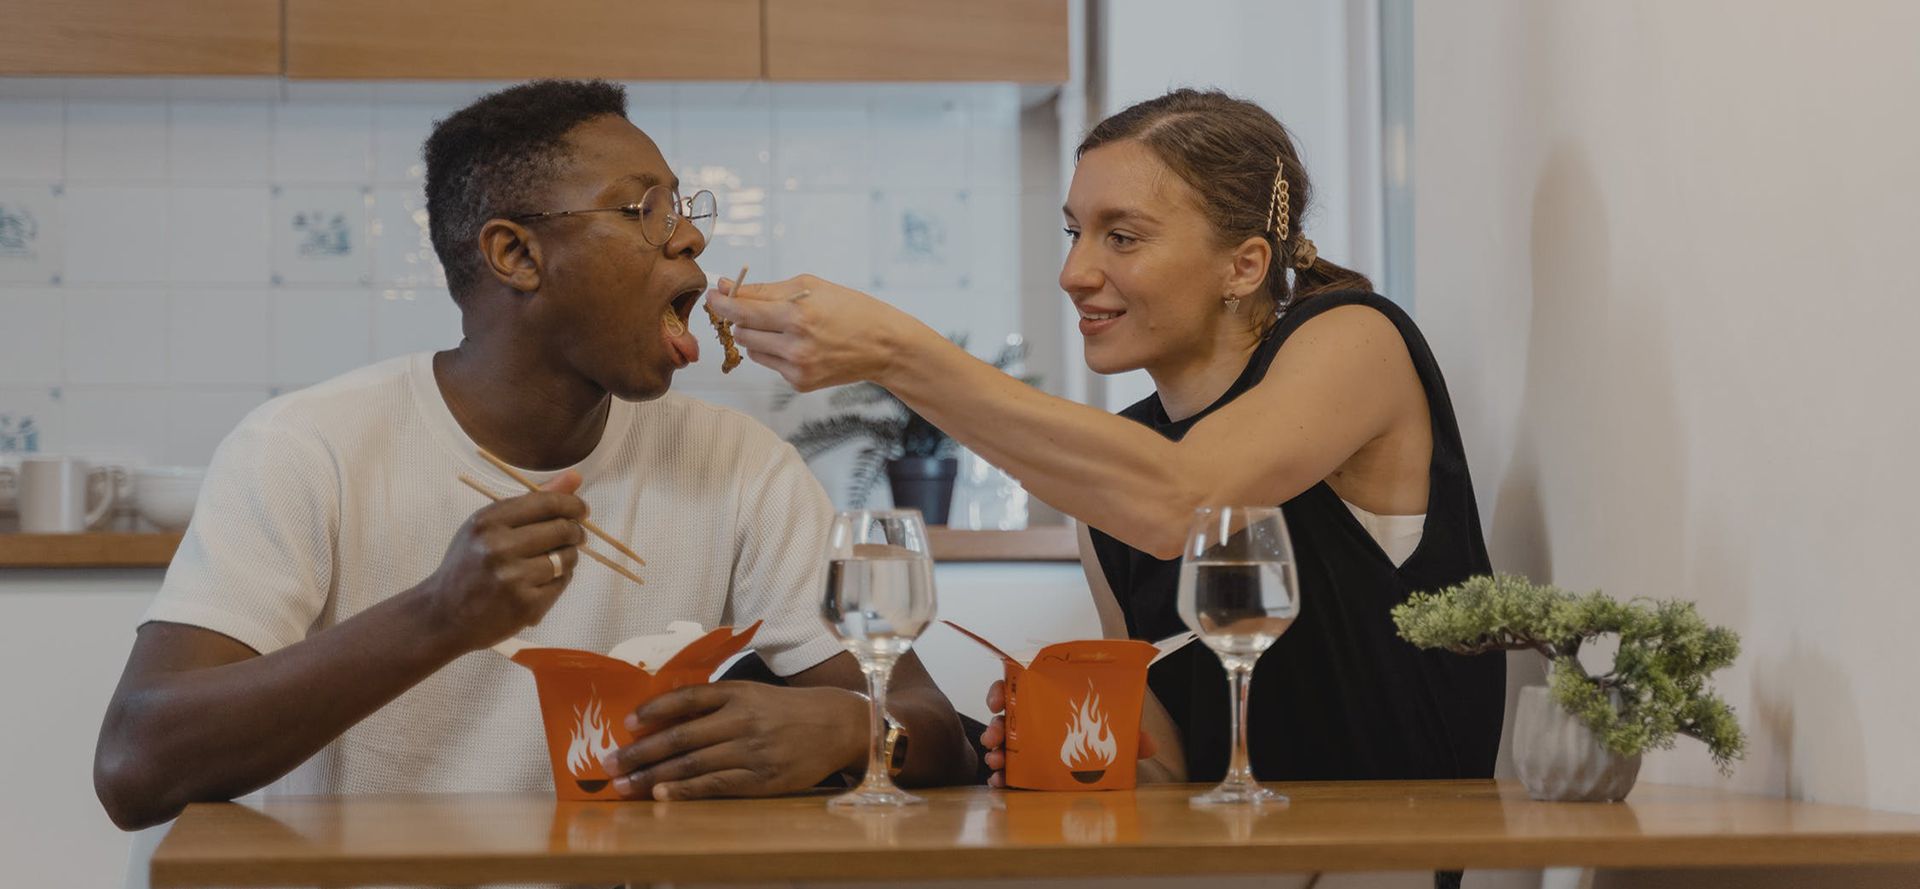 Couple on dating eating.